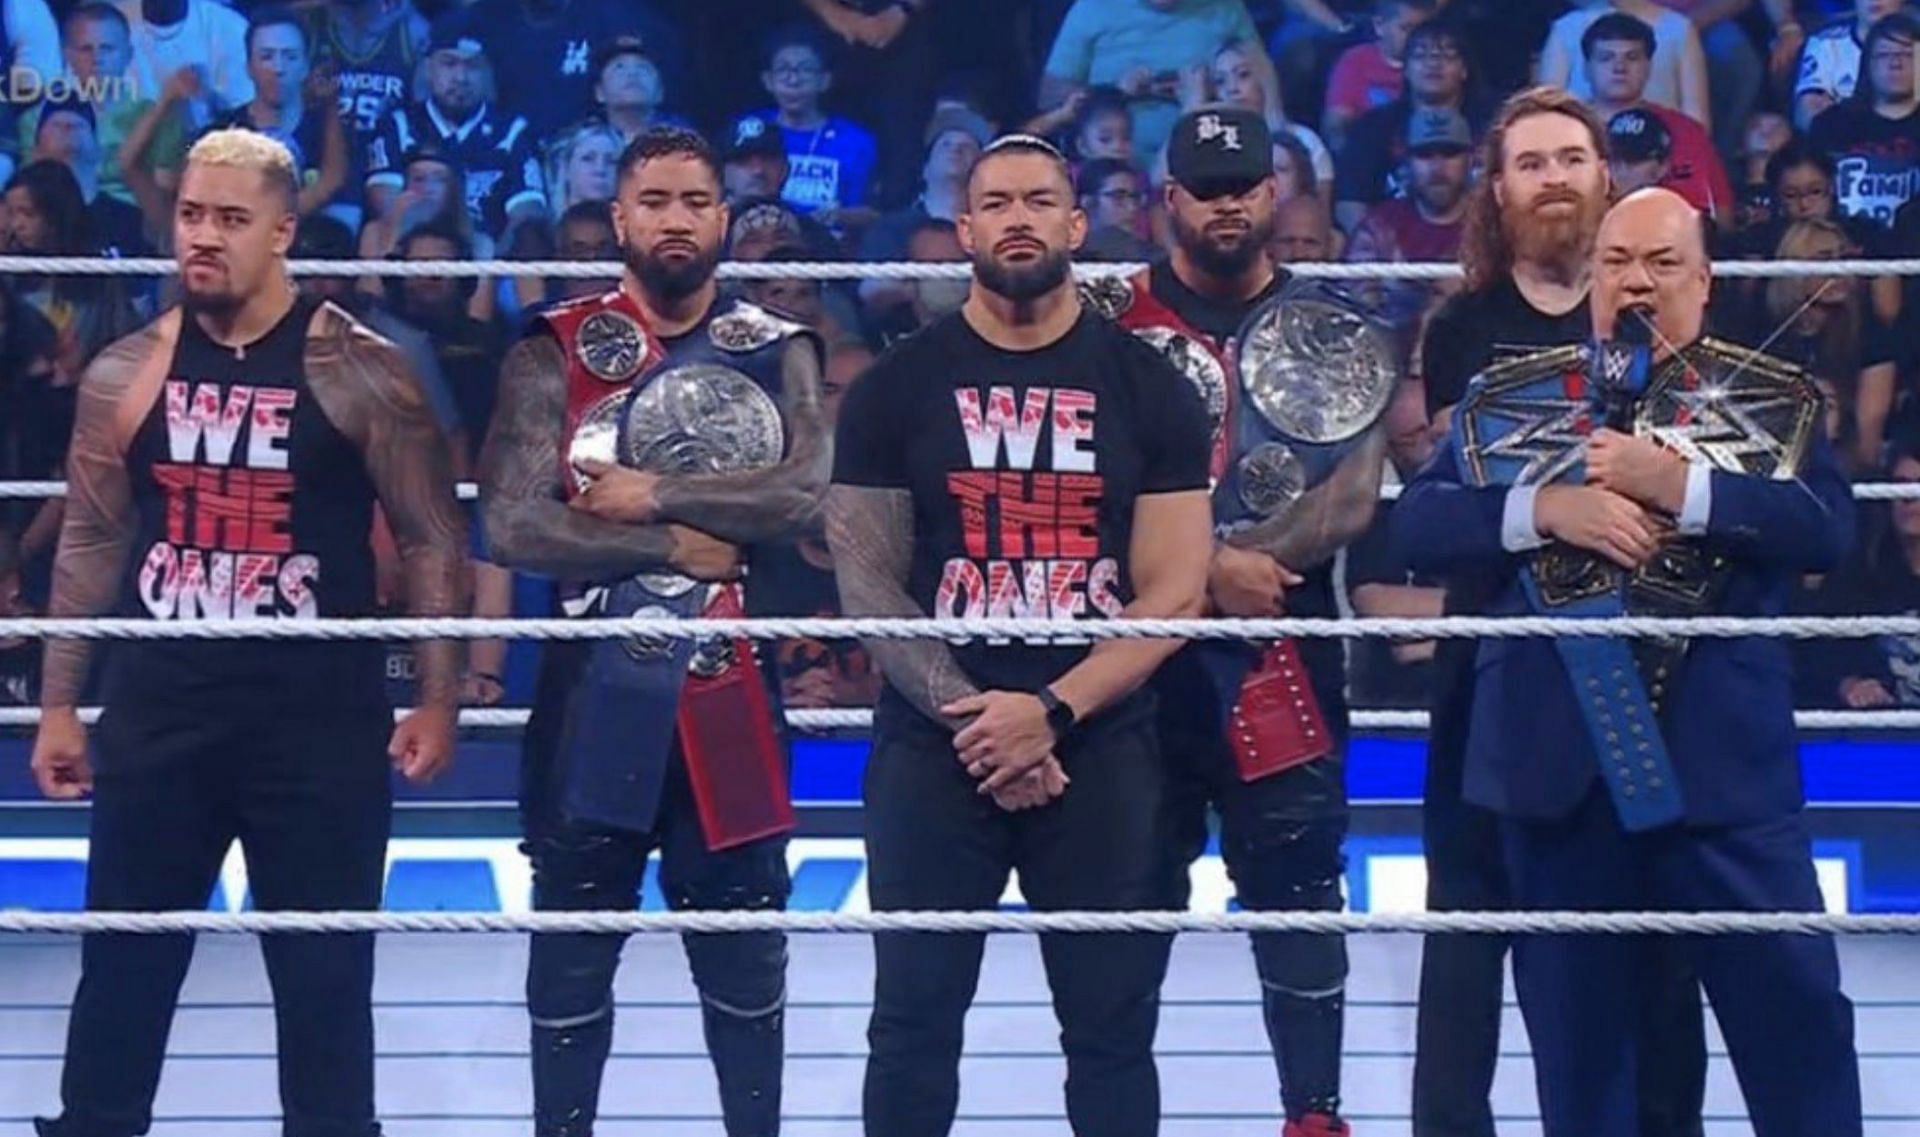 Bloodline has been a dominant force on SmackDown since many months.